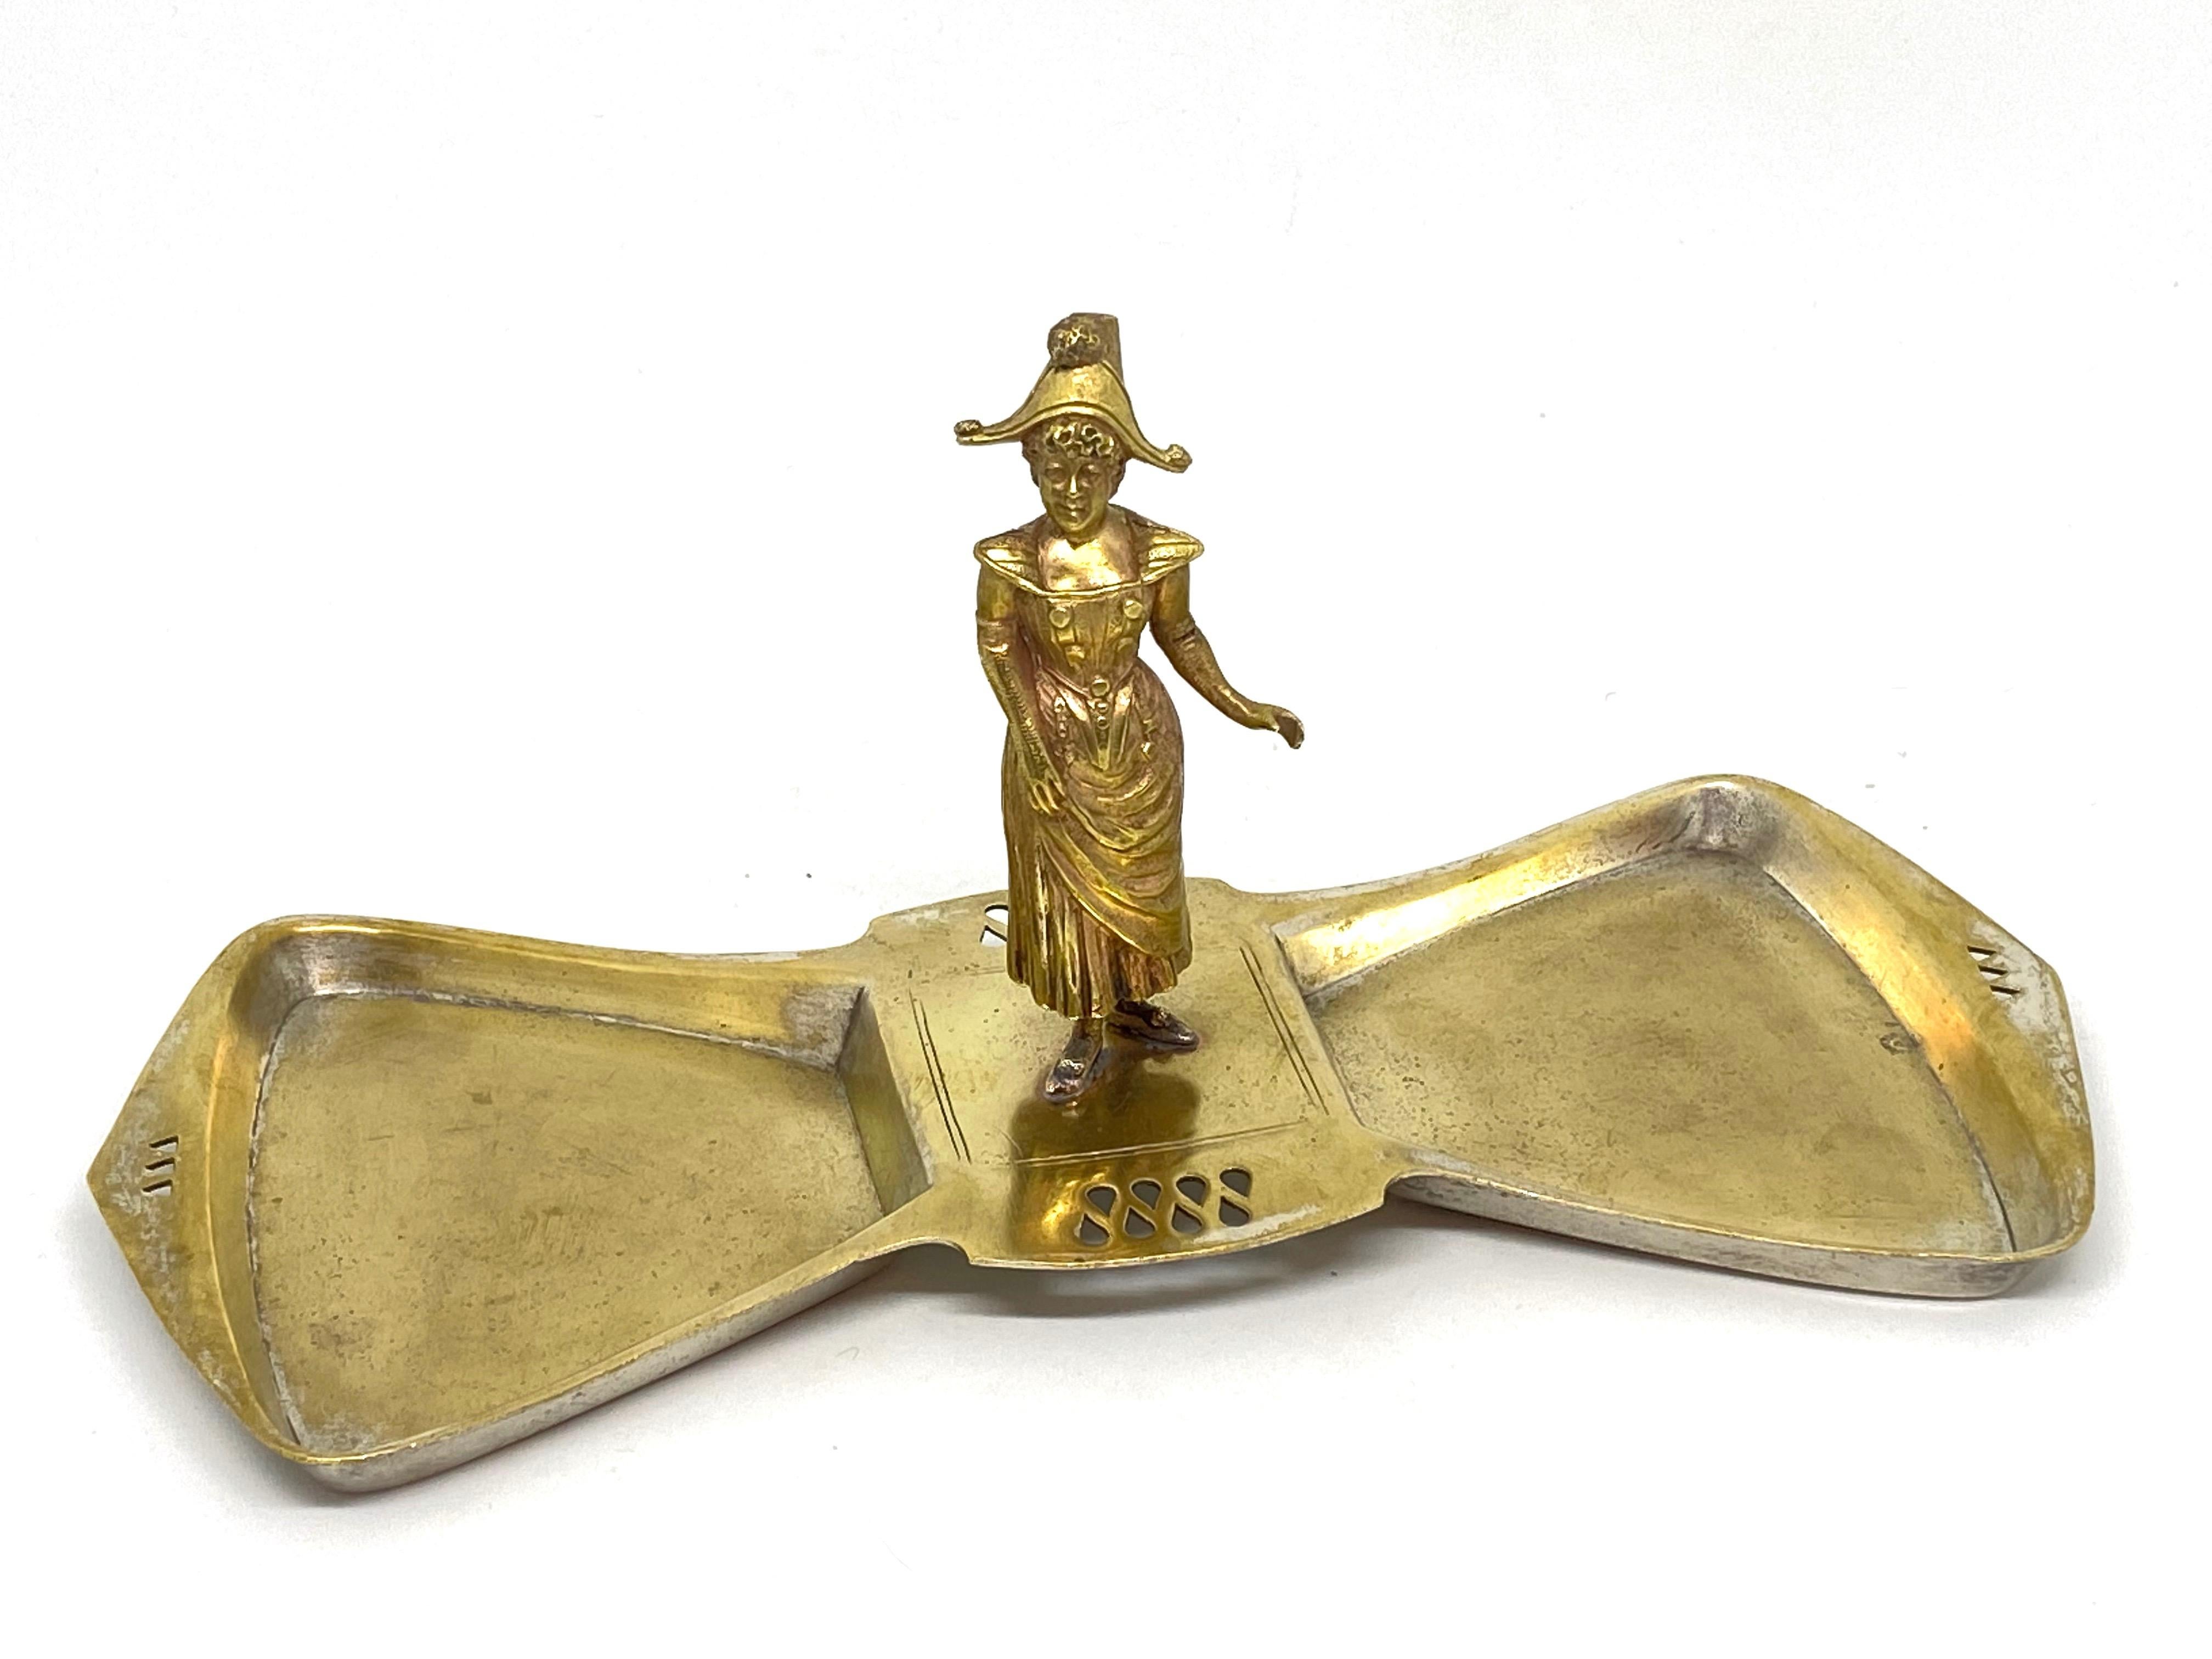 Metal Antique Business Card Holder Tray Catchall by Argentor, Germany, 1900s For Sale